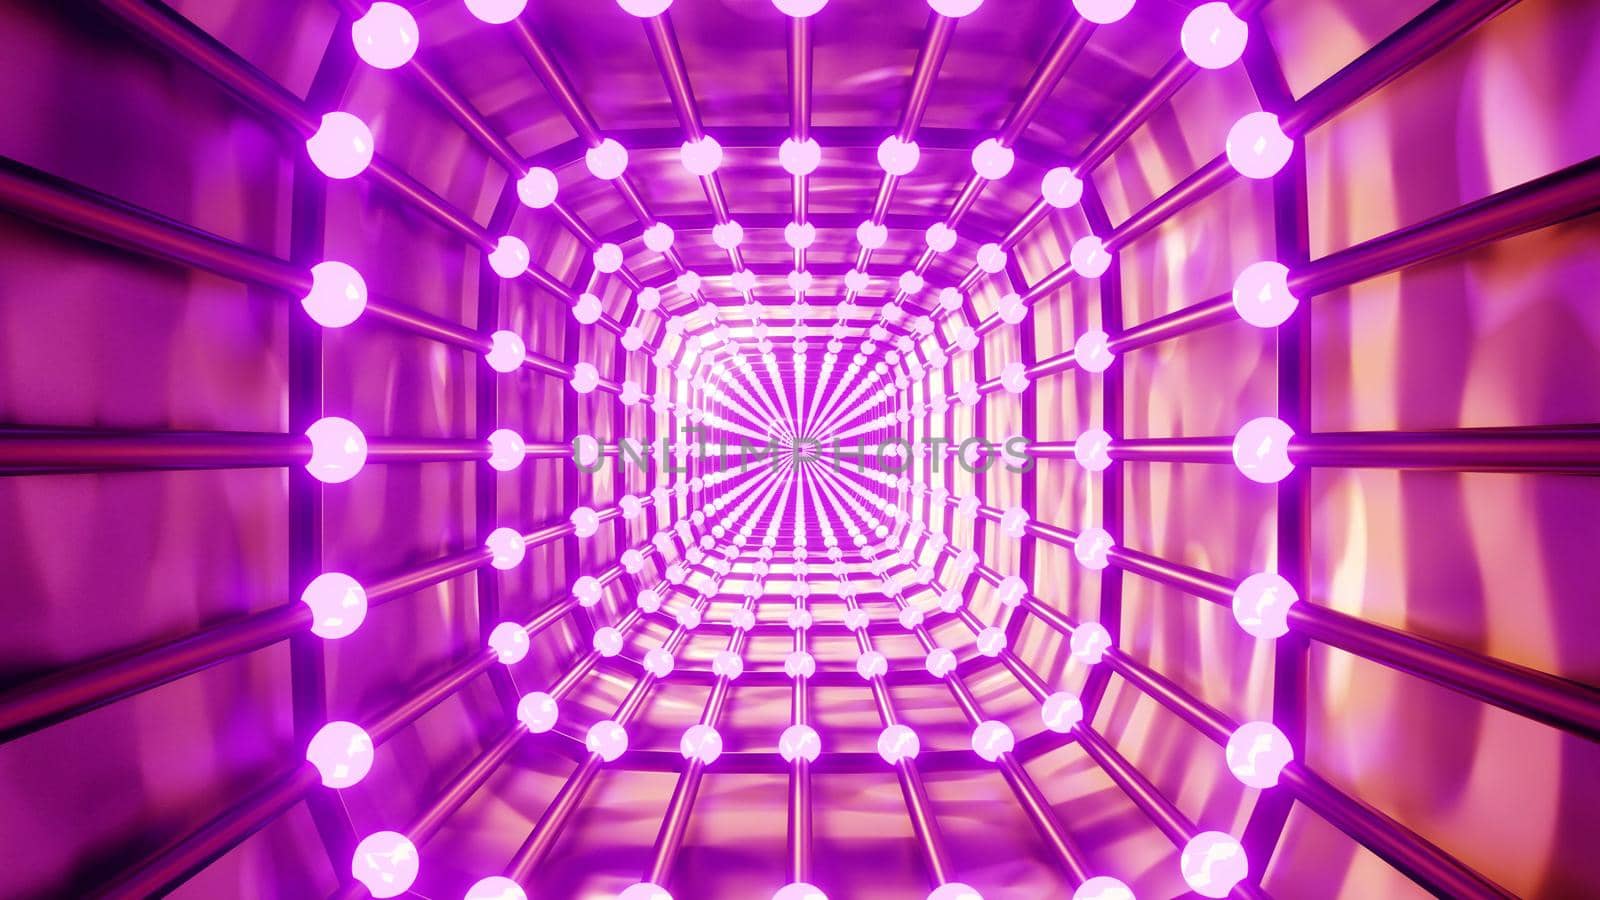 3d illustration of 4K UHD abstract tunnel formed by metal pipes and bright glowing lamps